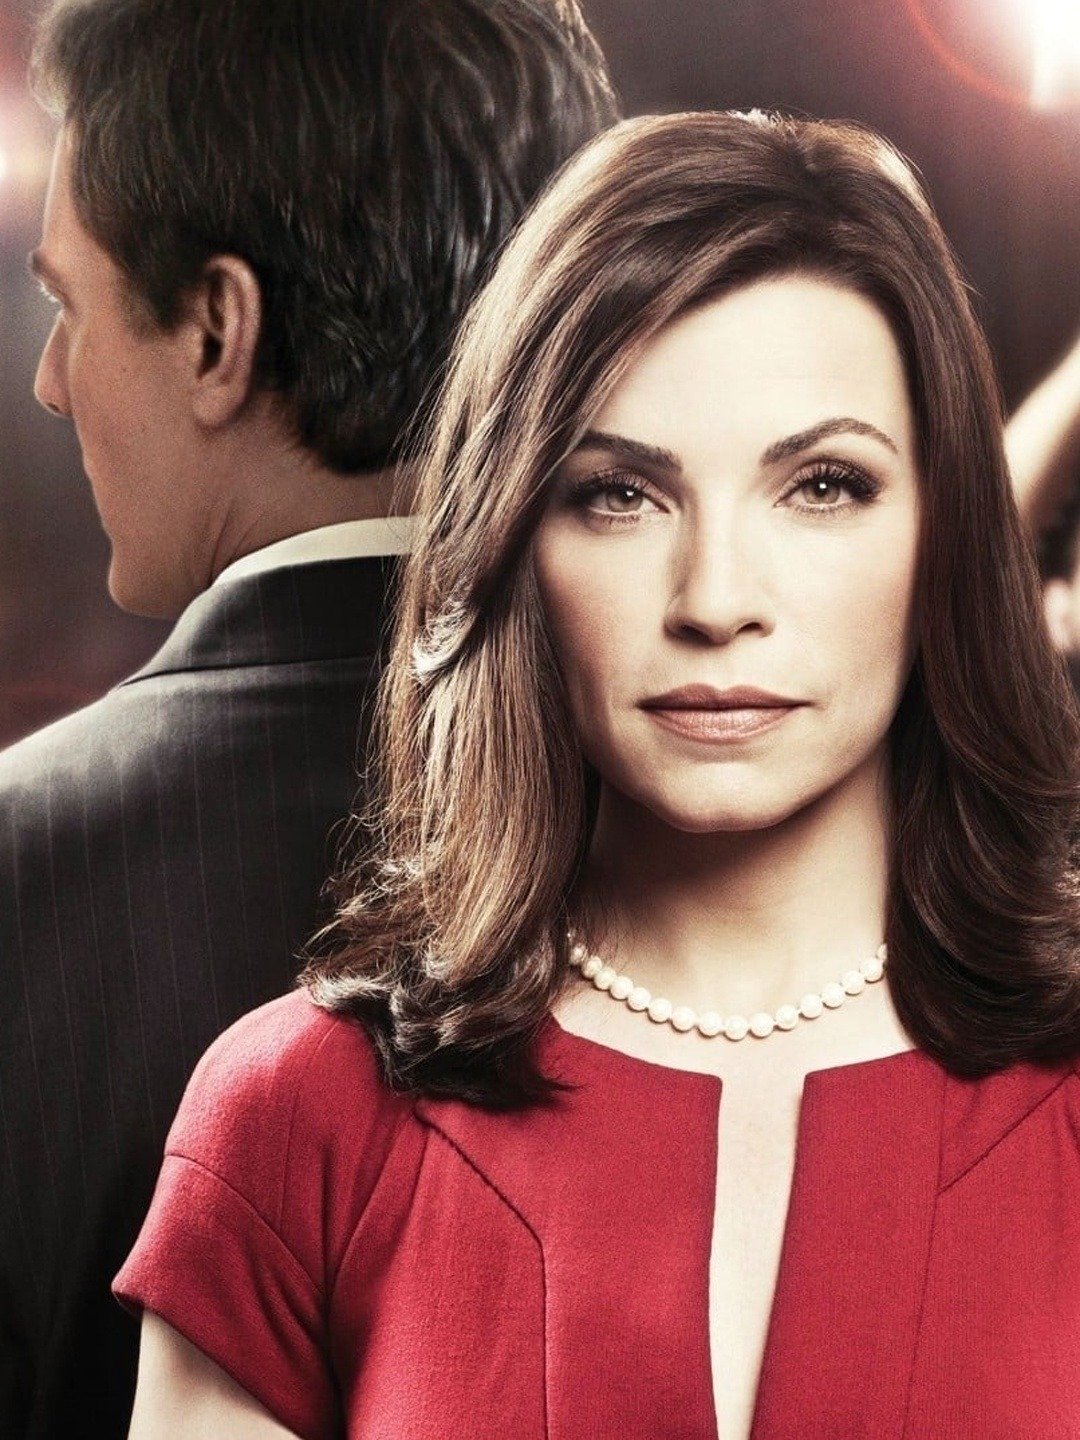 The Good Wife photo